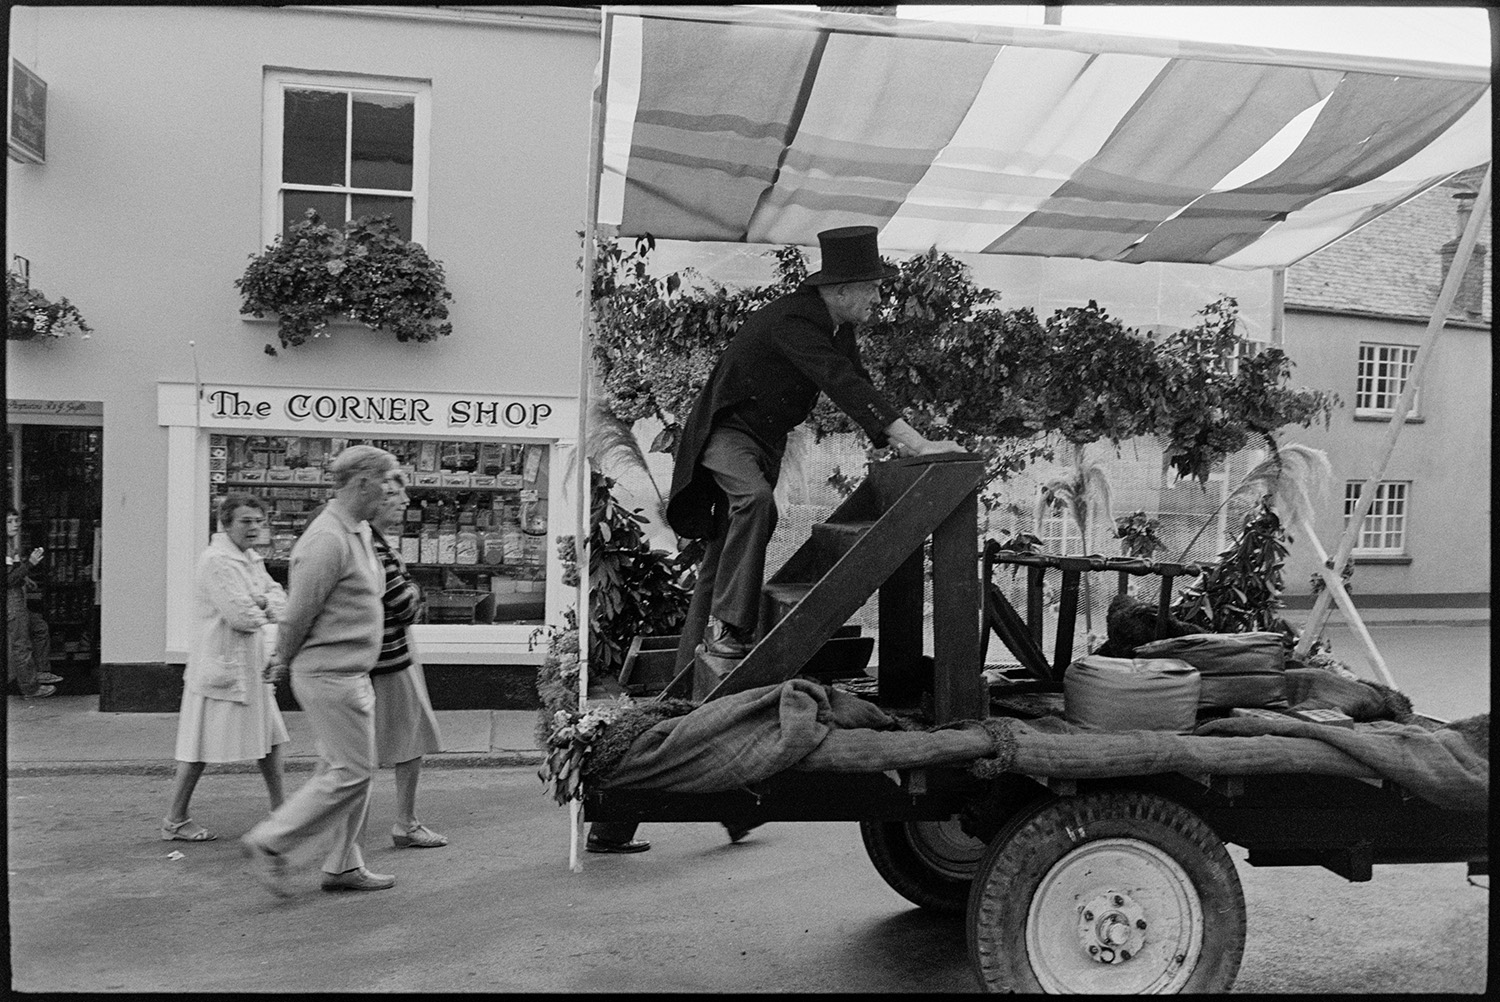 Village Fair, start of race for children in street, women, mothers holding children. 
[A man wearing a top hat on a decorated trailer at Chulmleigh Fair. Three people are walking behind the trailer past the shop front of 'The Corner Shop'.]